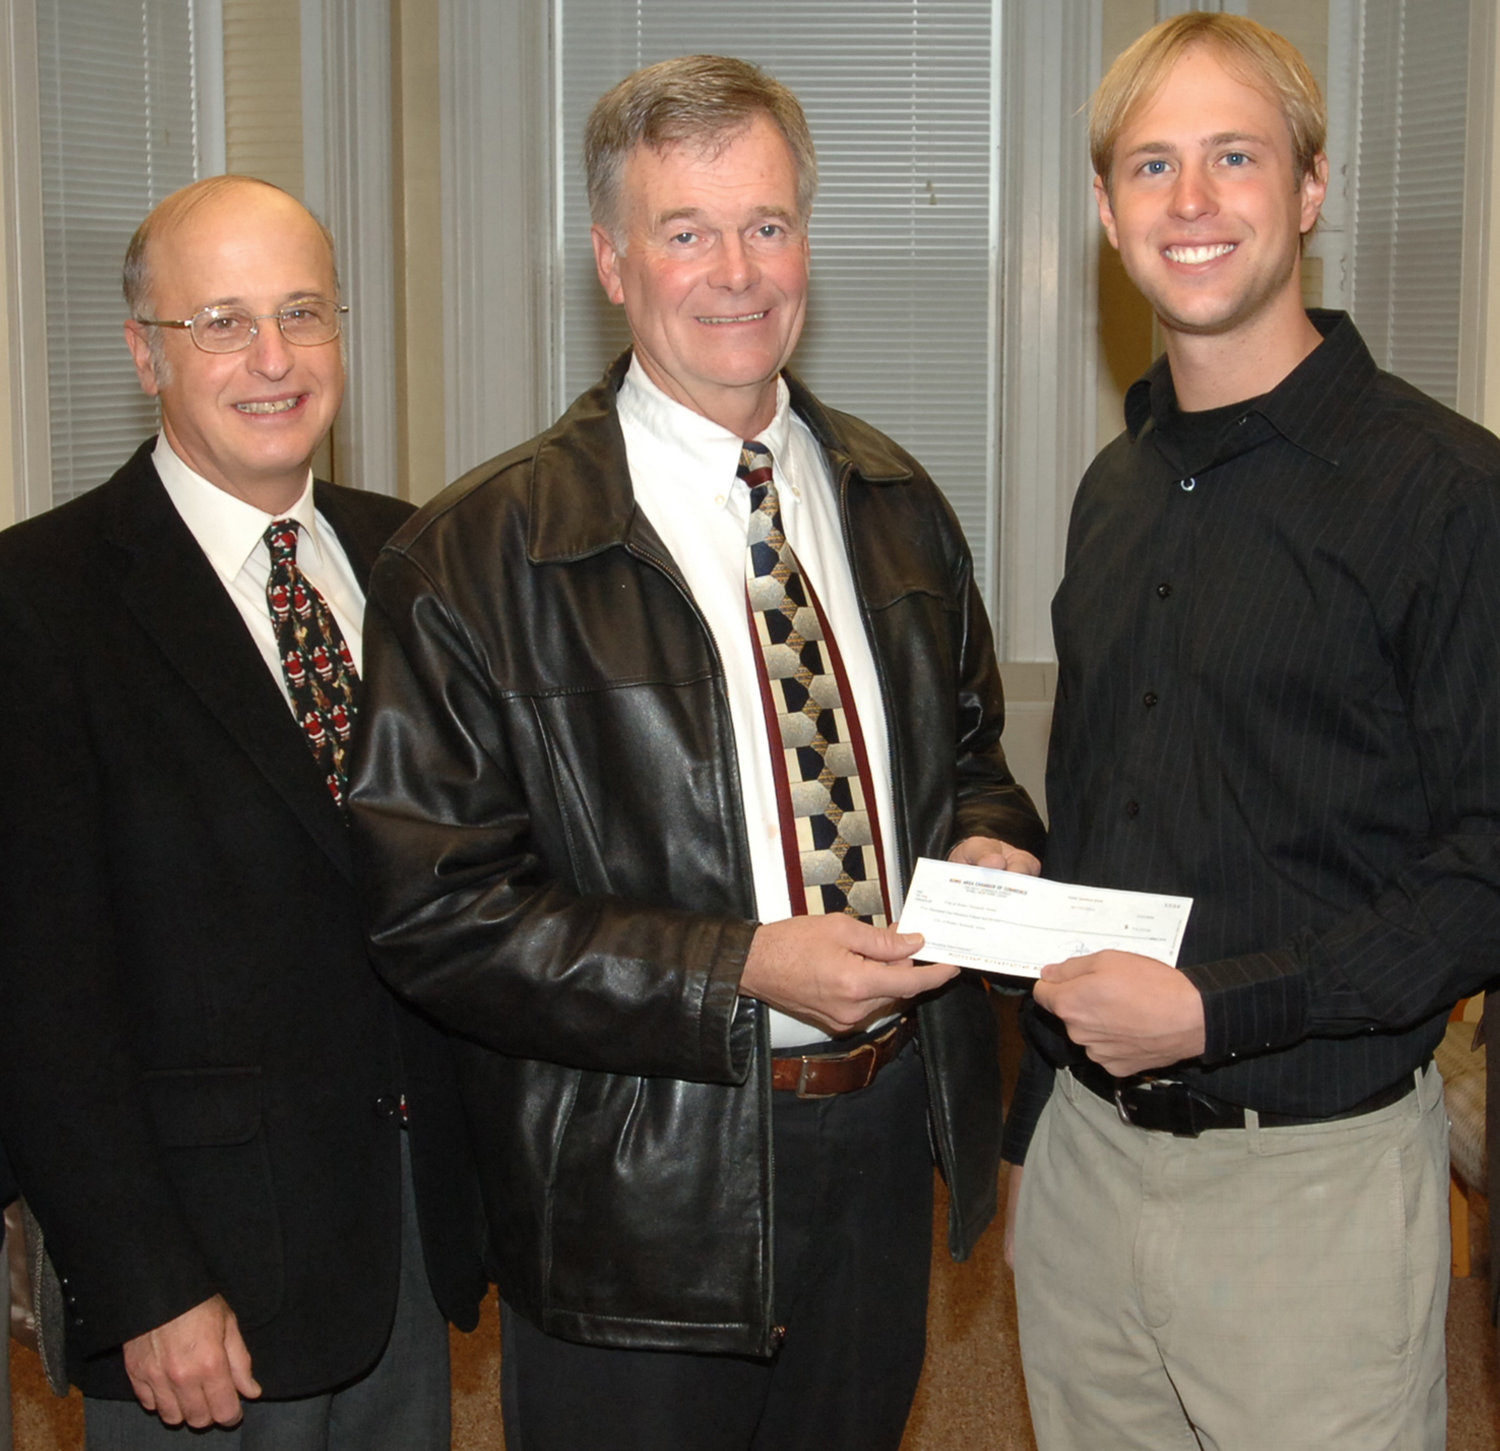 Showing his support for a renovation project of the city’s J.F. Kennedy Civic Arena, Bill Guglielmo, left, is shown donating the proceeds — $5,115 — to the city’s Think Rink fund. From left: Guglielmo, former City Recreation Director Bill Fleet; and local businessman Wesley Cupp.